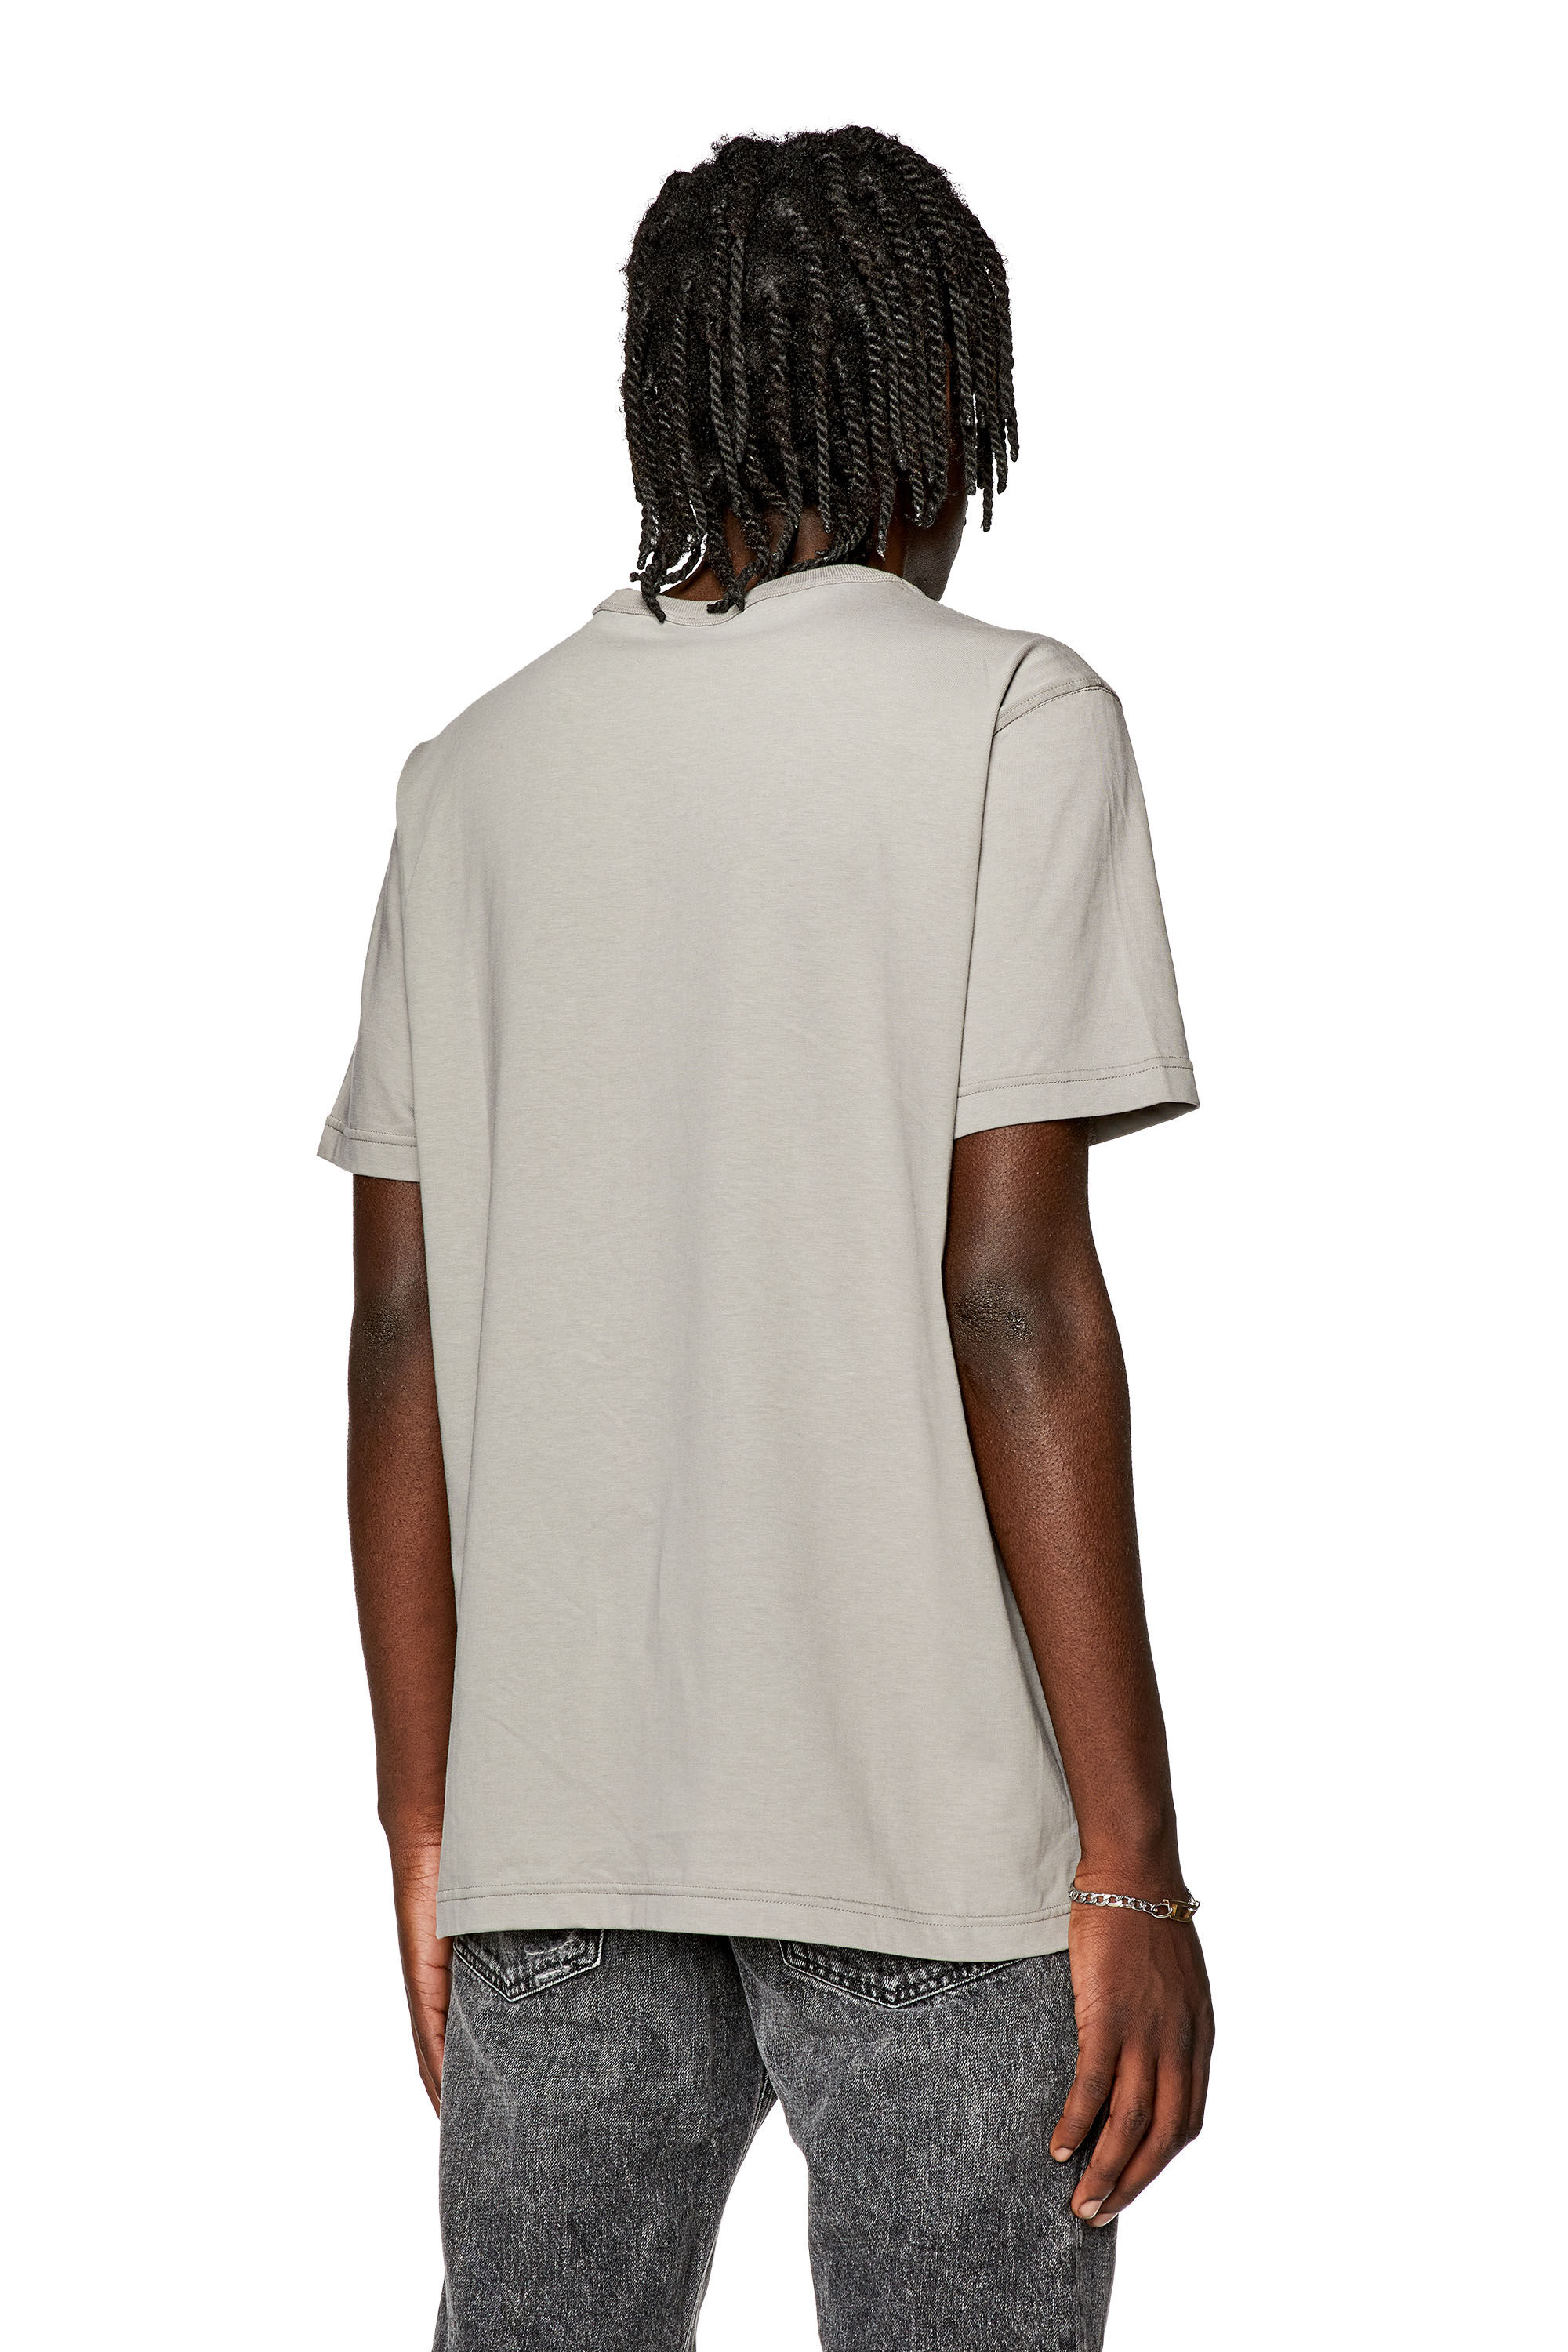 Men's T-shirt with injection moulded logo | T-JUST-OD Diesel